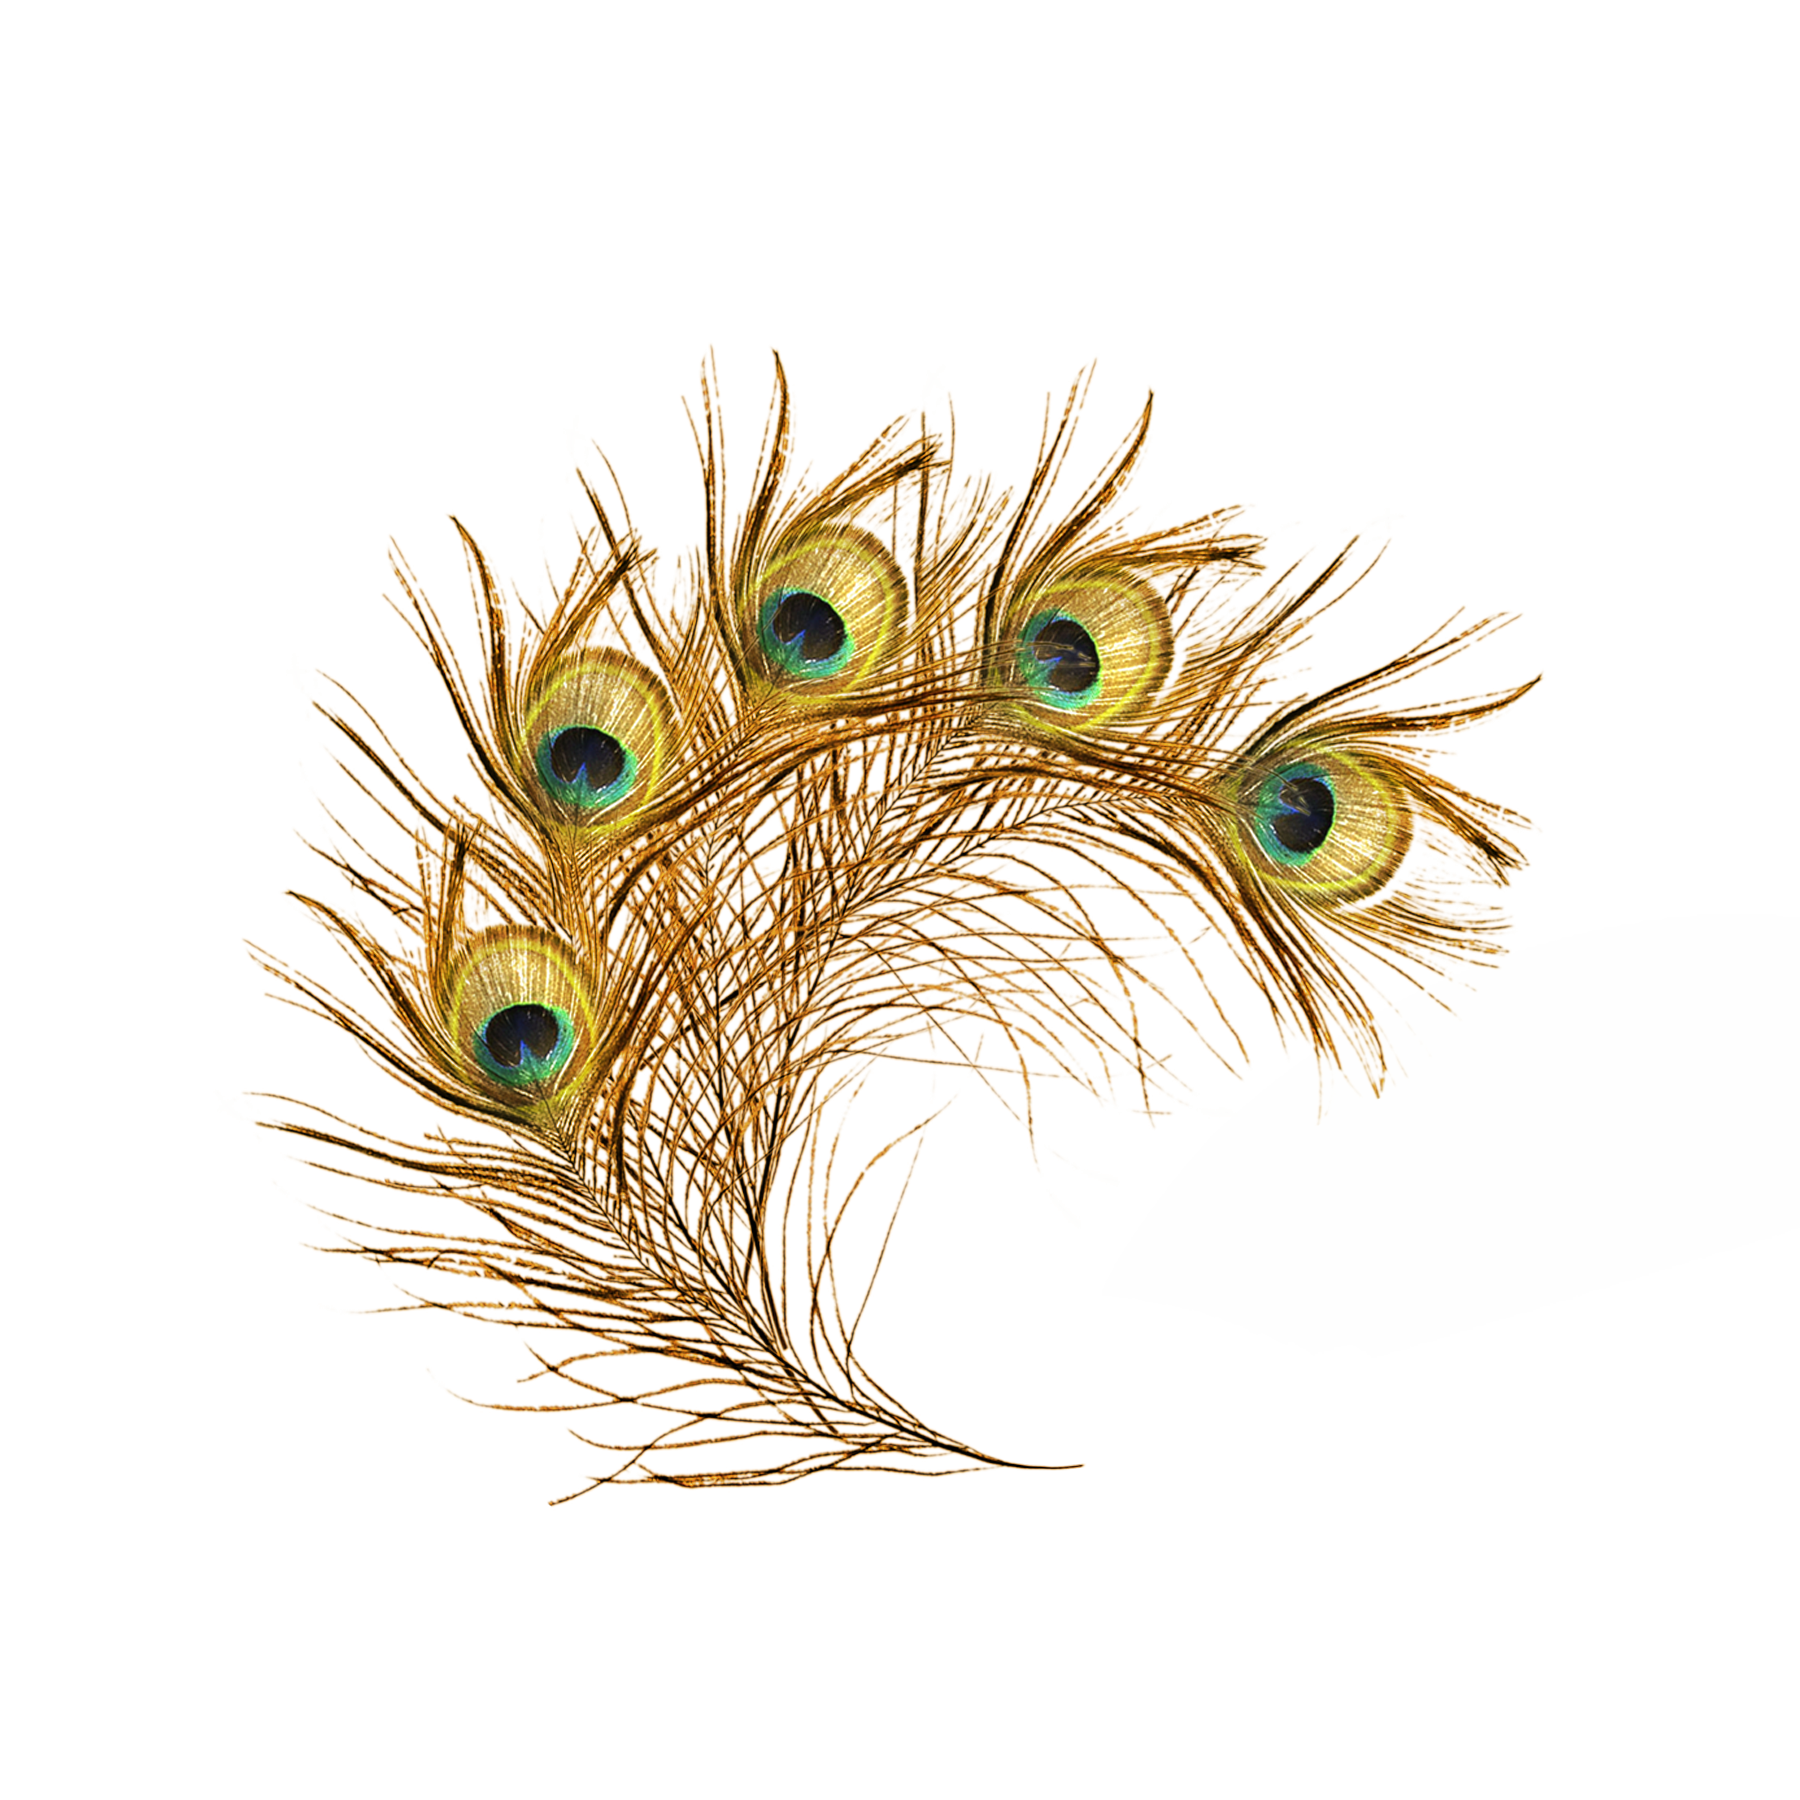 feathers clipart peacock